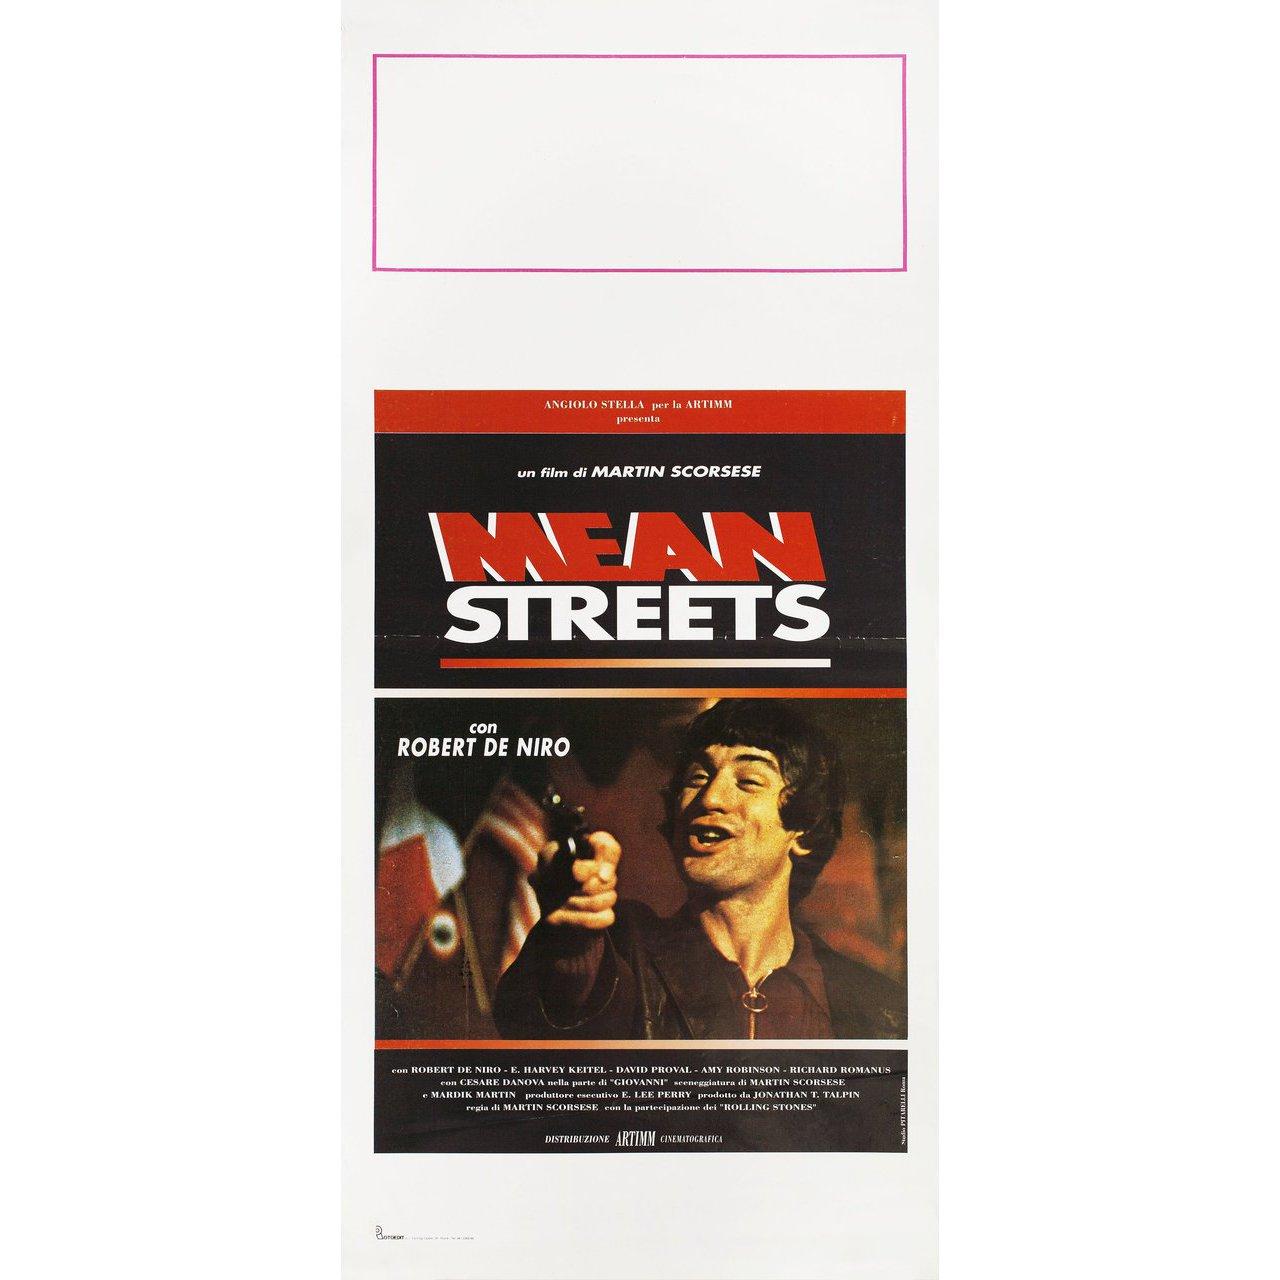 mean streets poster